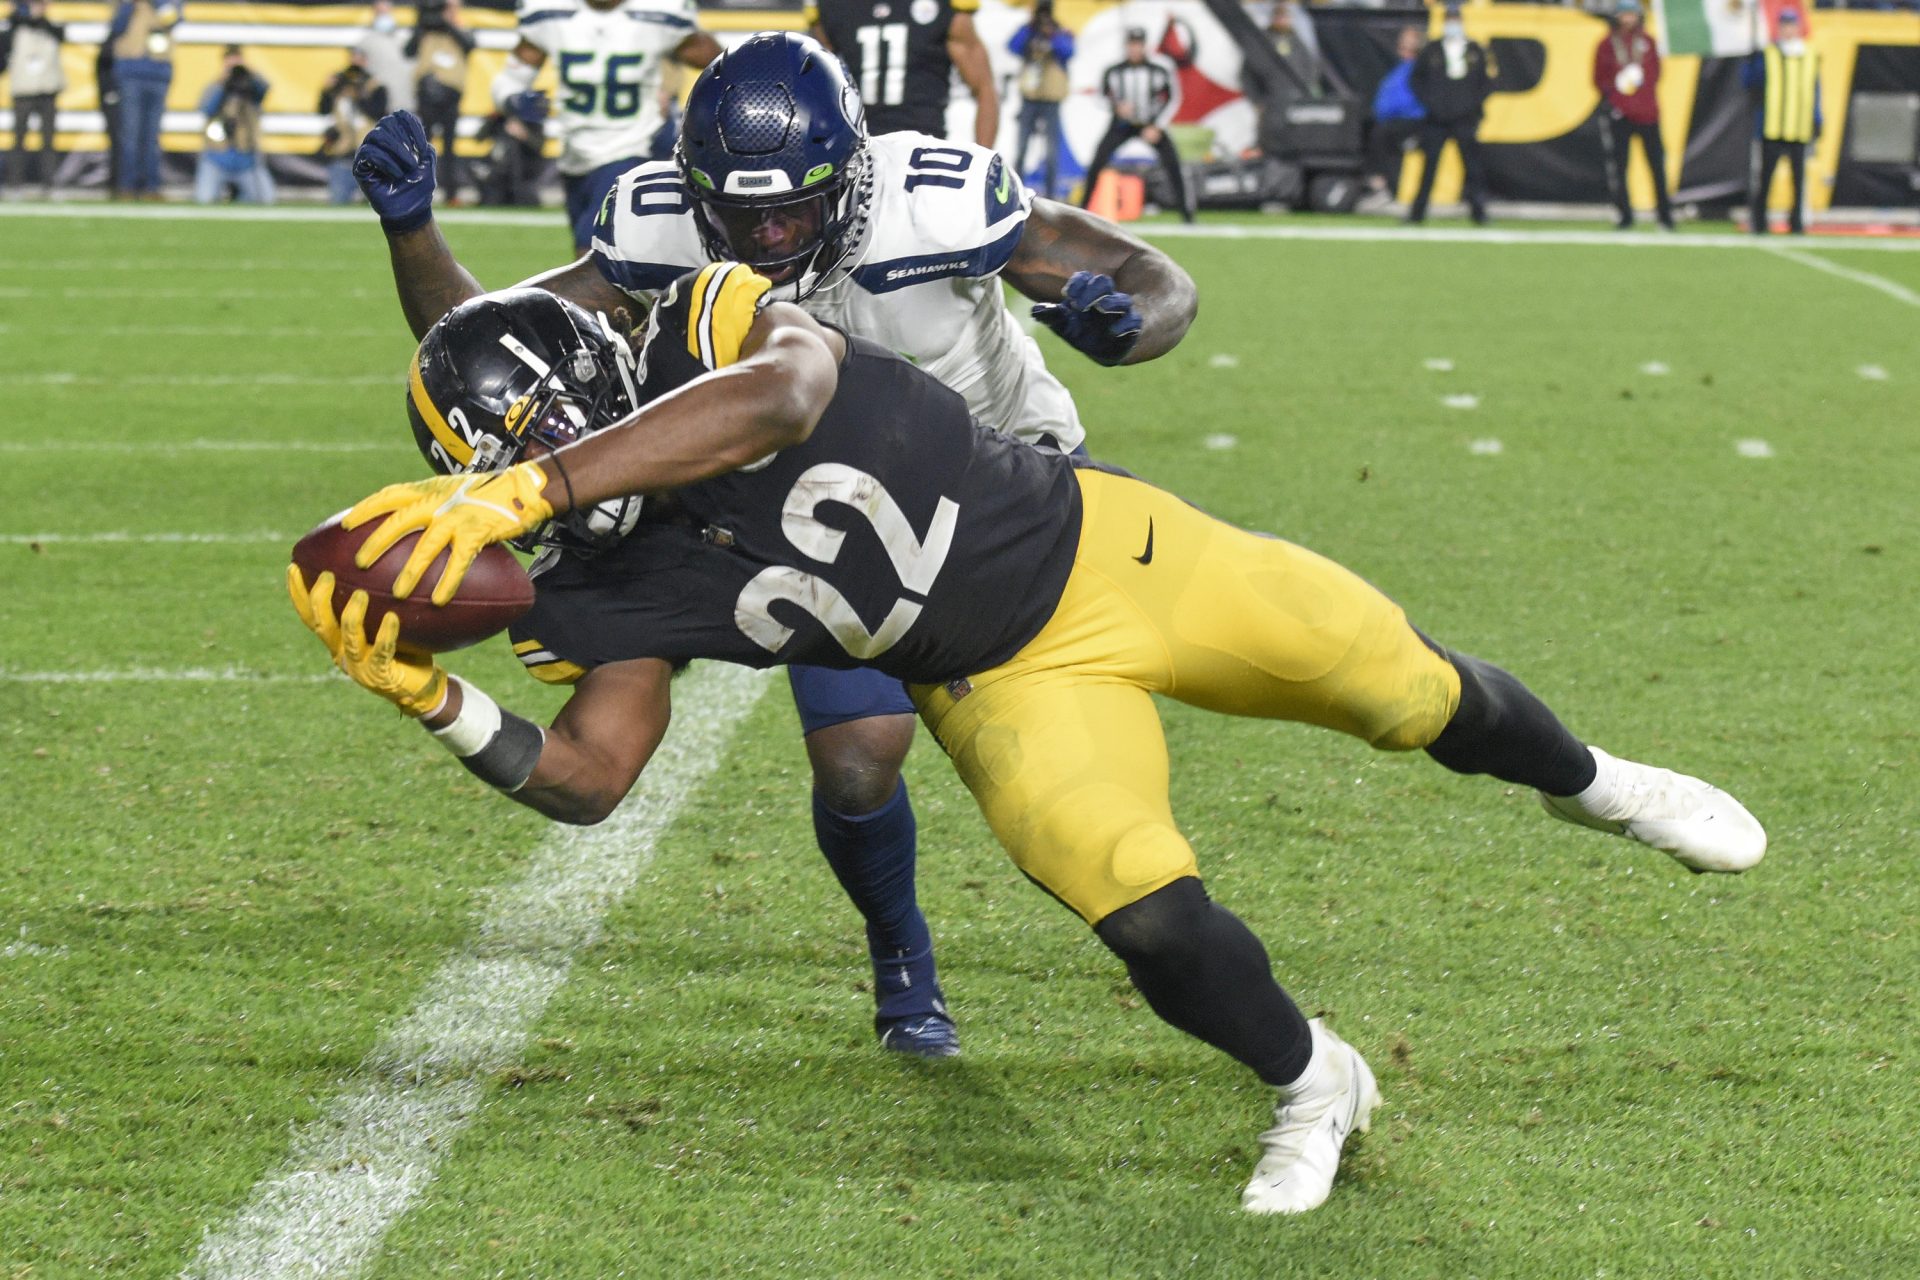 Pittsburgh Steelers running back Najee Harris (22) dashes past Seattle Seahawks defensive end Benson Mayowa (10) on his way to the end zone and a touchdown during the first half an NFL football game, Sunday, Oct. 17, 2021, in Pittsburgh.